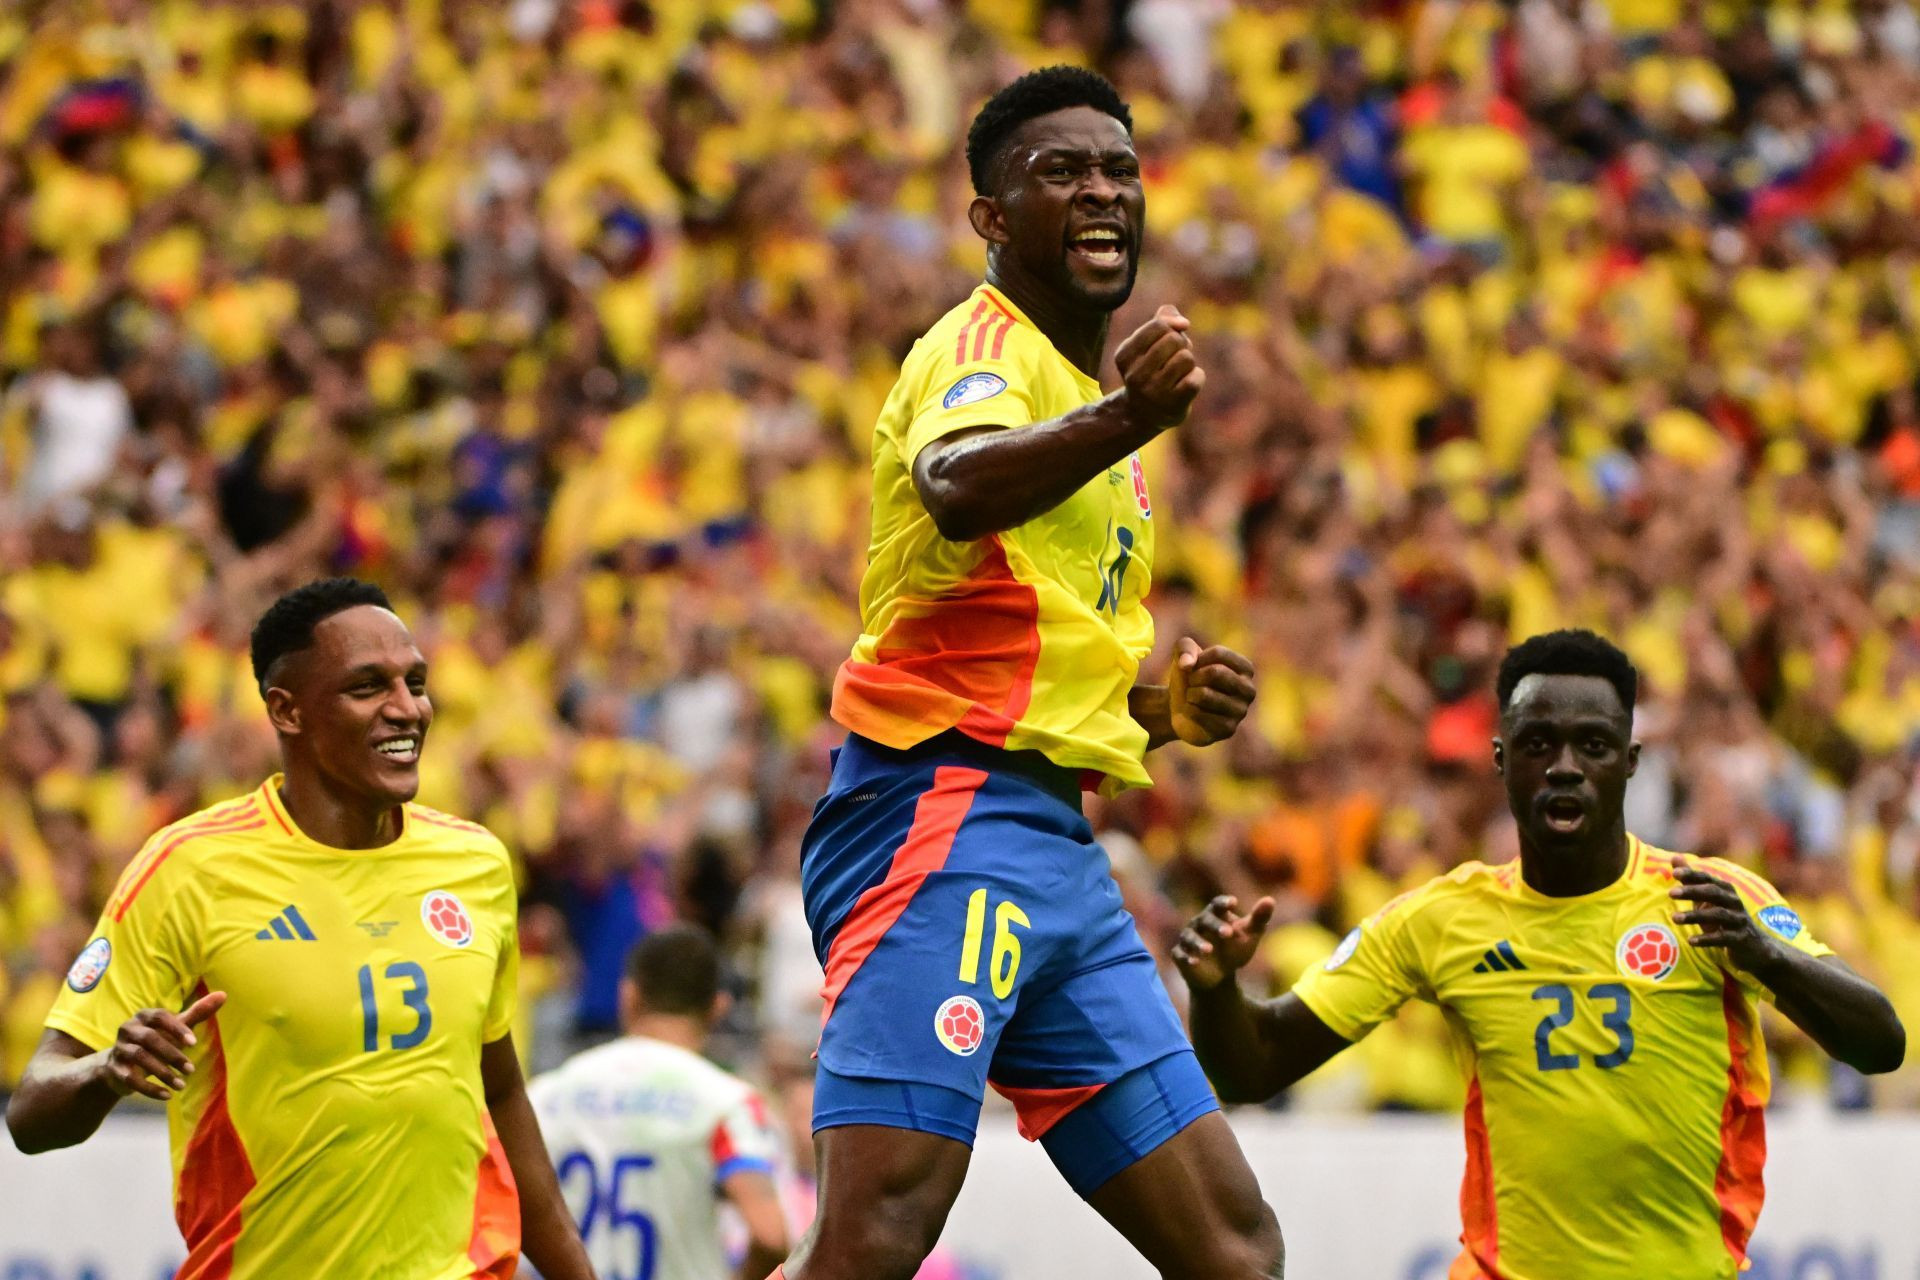 Colombia vs Costa Rica Head-to-Head stats and numbers you need to know before Match 15 of the 2024 Copa America